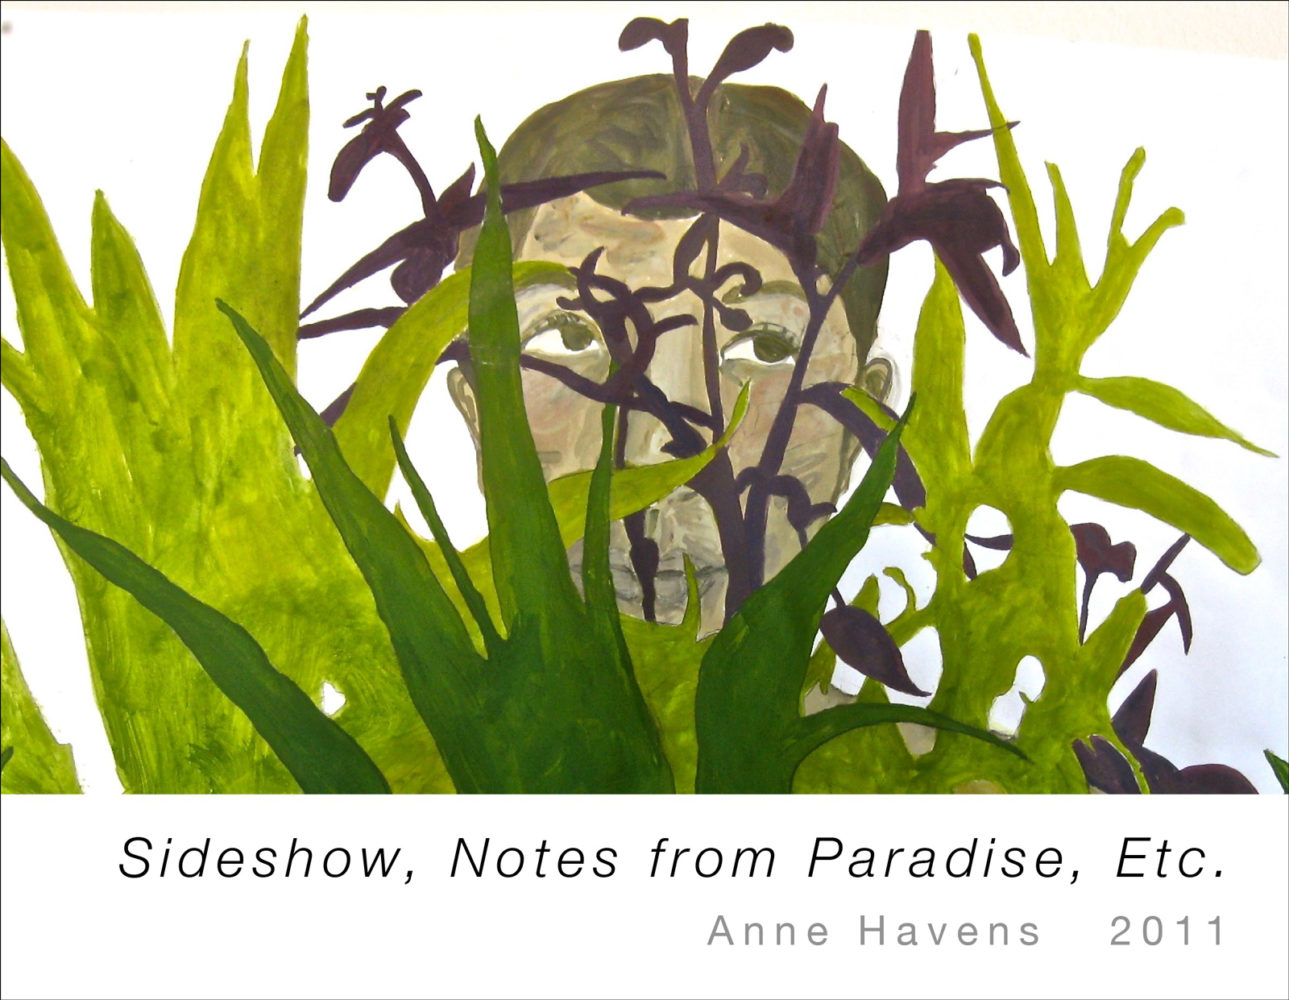 Cover of Anne Havens "Slideshow, Notes from Paradise, Etc." 2011